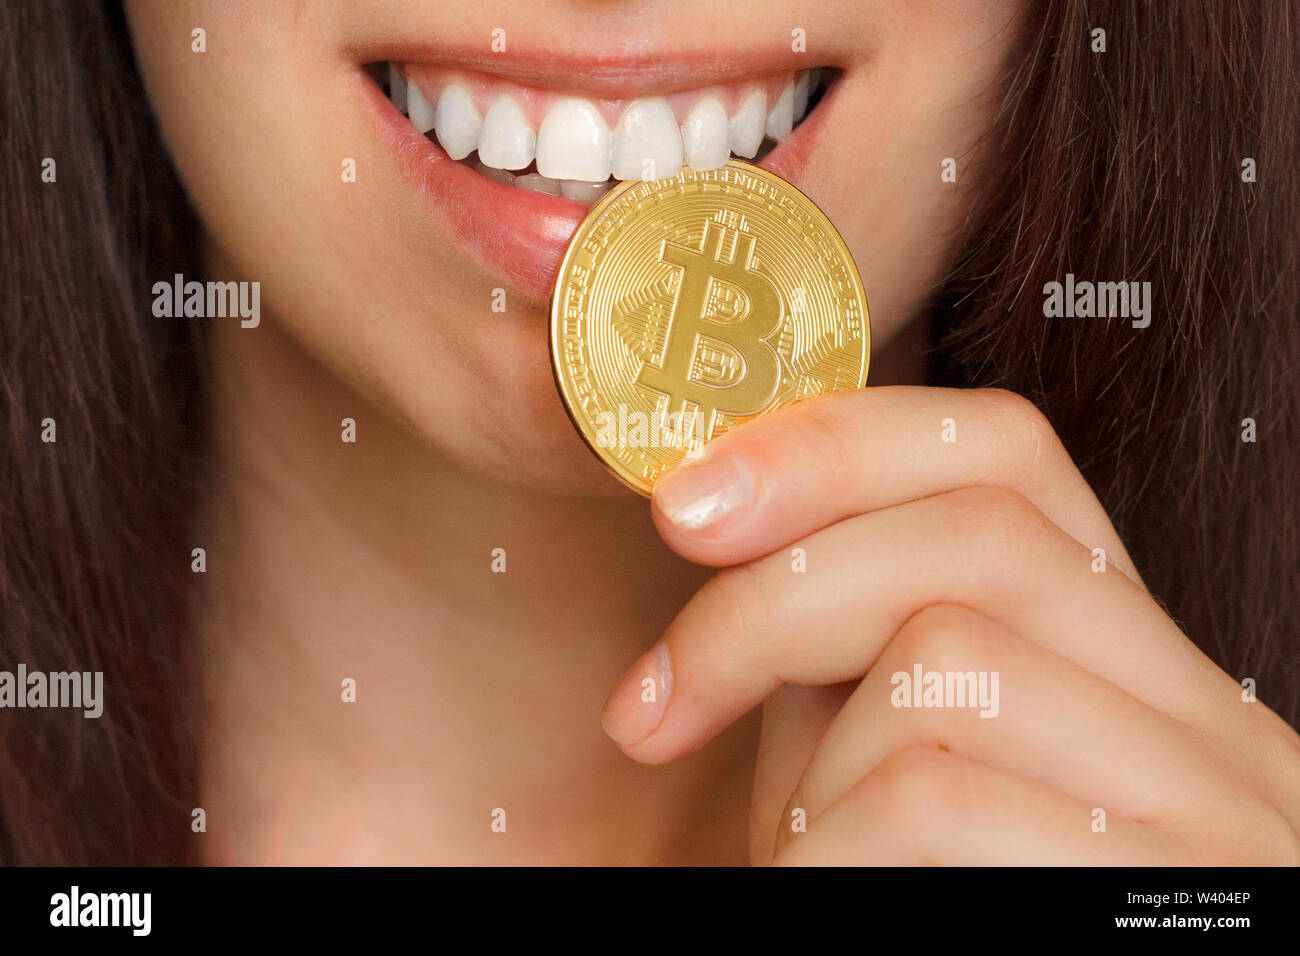 A young girl is biting of big golden BTC bitcoin by white teeth. Golden coin in the mouth. Stock Photo